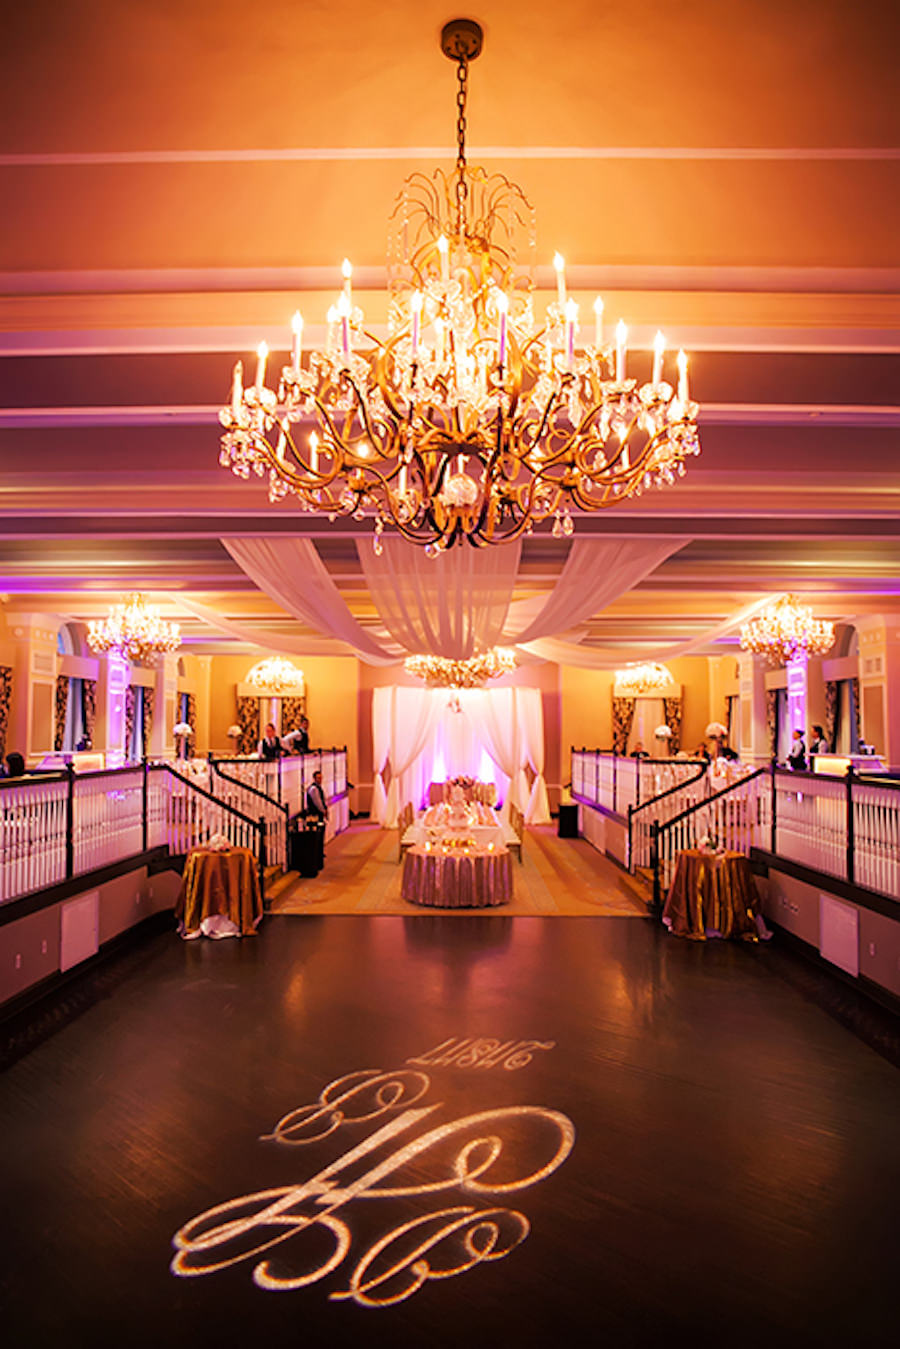 Classic Pink and Gold Wedding with Lighted Dance Floor Monogram under Intricate Chandelier at St Pete Beach Iconic Hotel Wedding Venue The Don Cesar | St Petersburg Wedding Photographer Limelight Photography